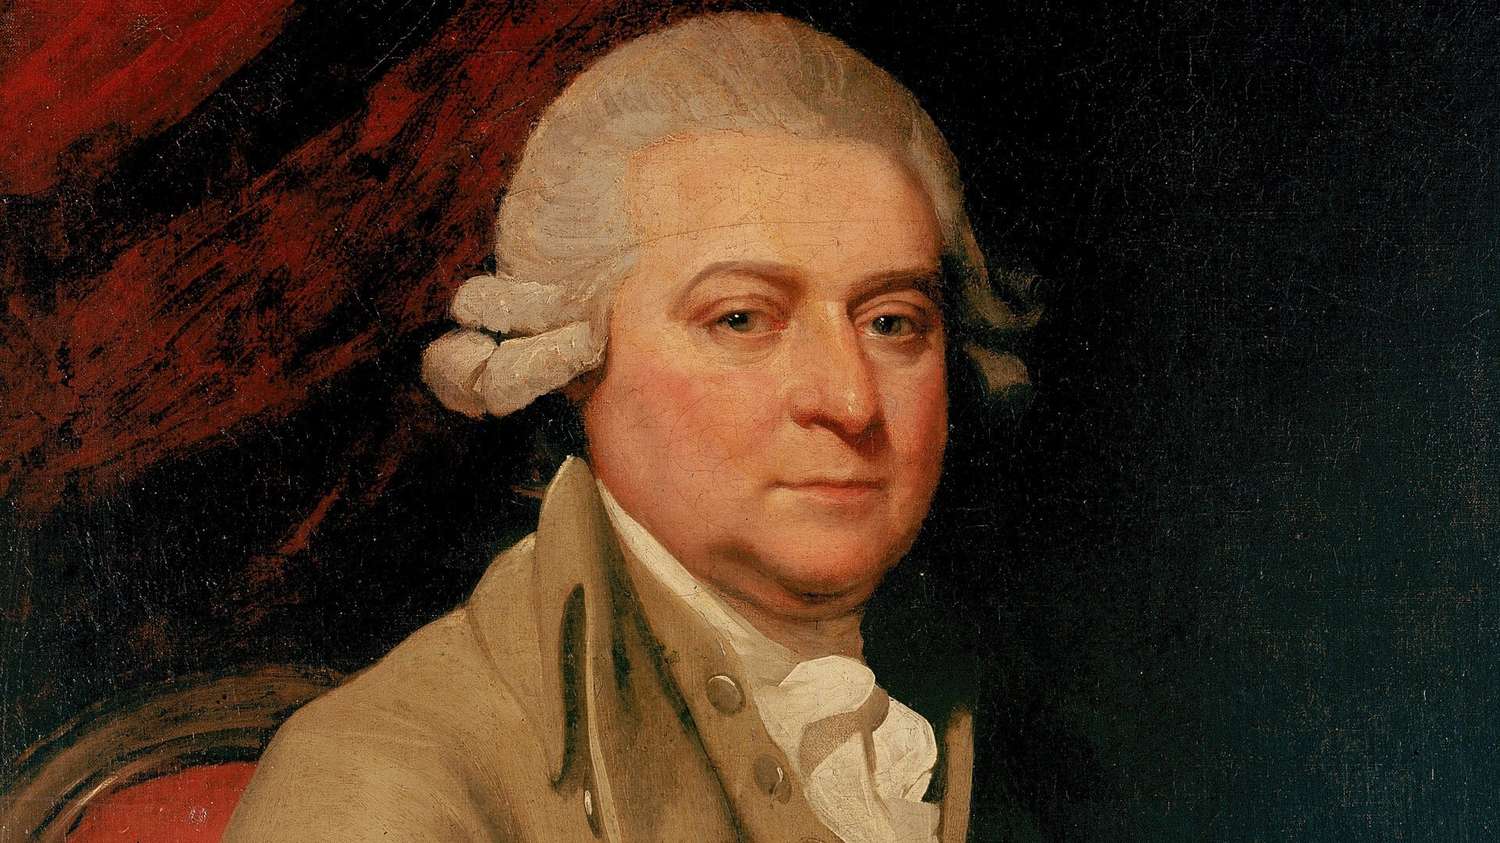 John Adams: A Founding Father's Journey from Revolutionary Visionary to President